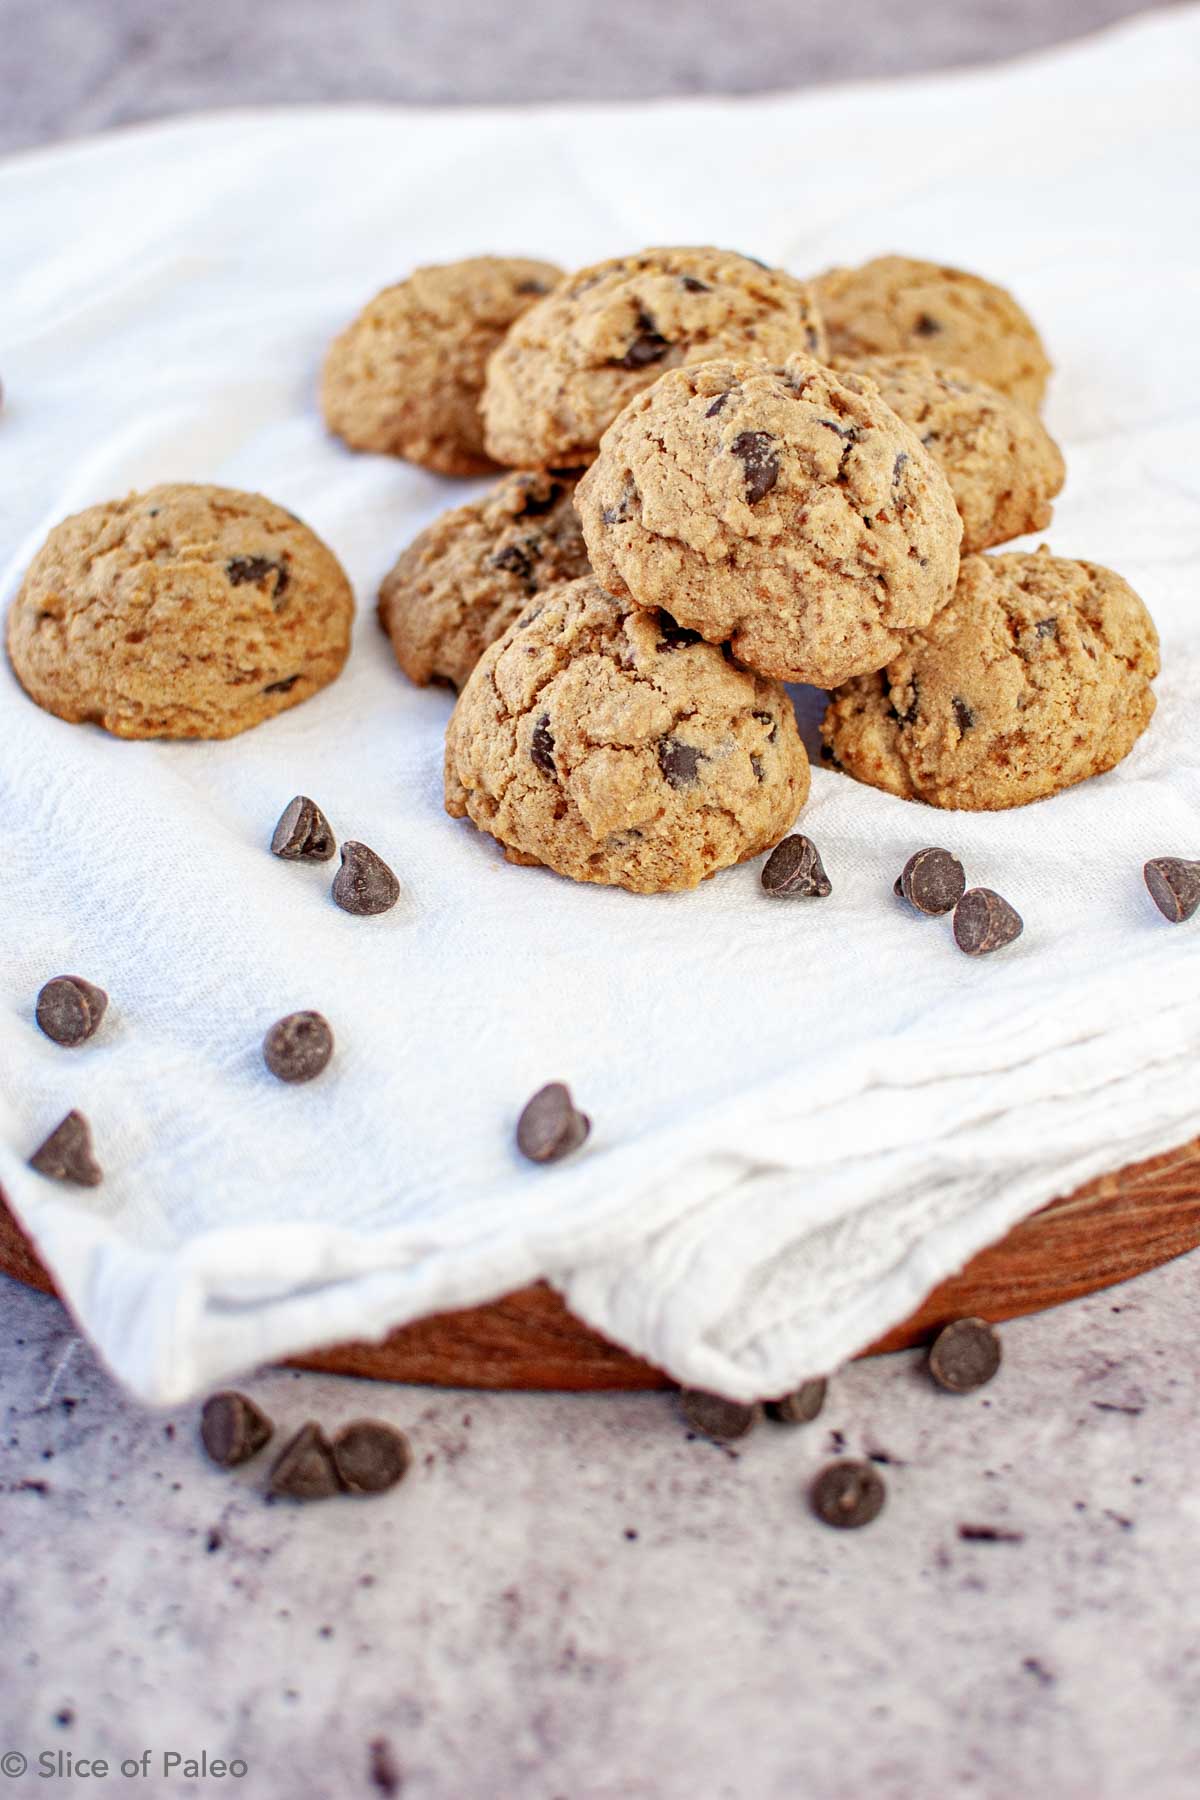 Paleo Chocolate Chip Cookies piled on a dish towel